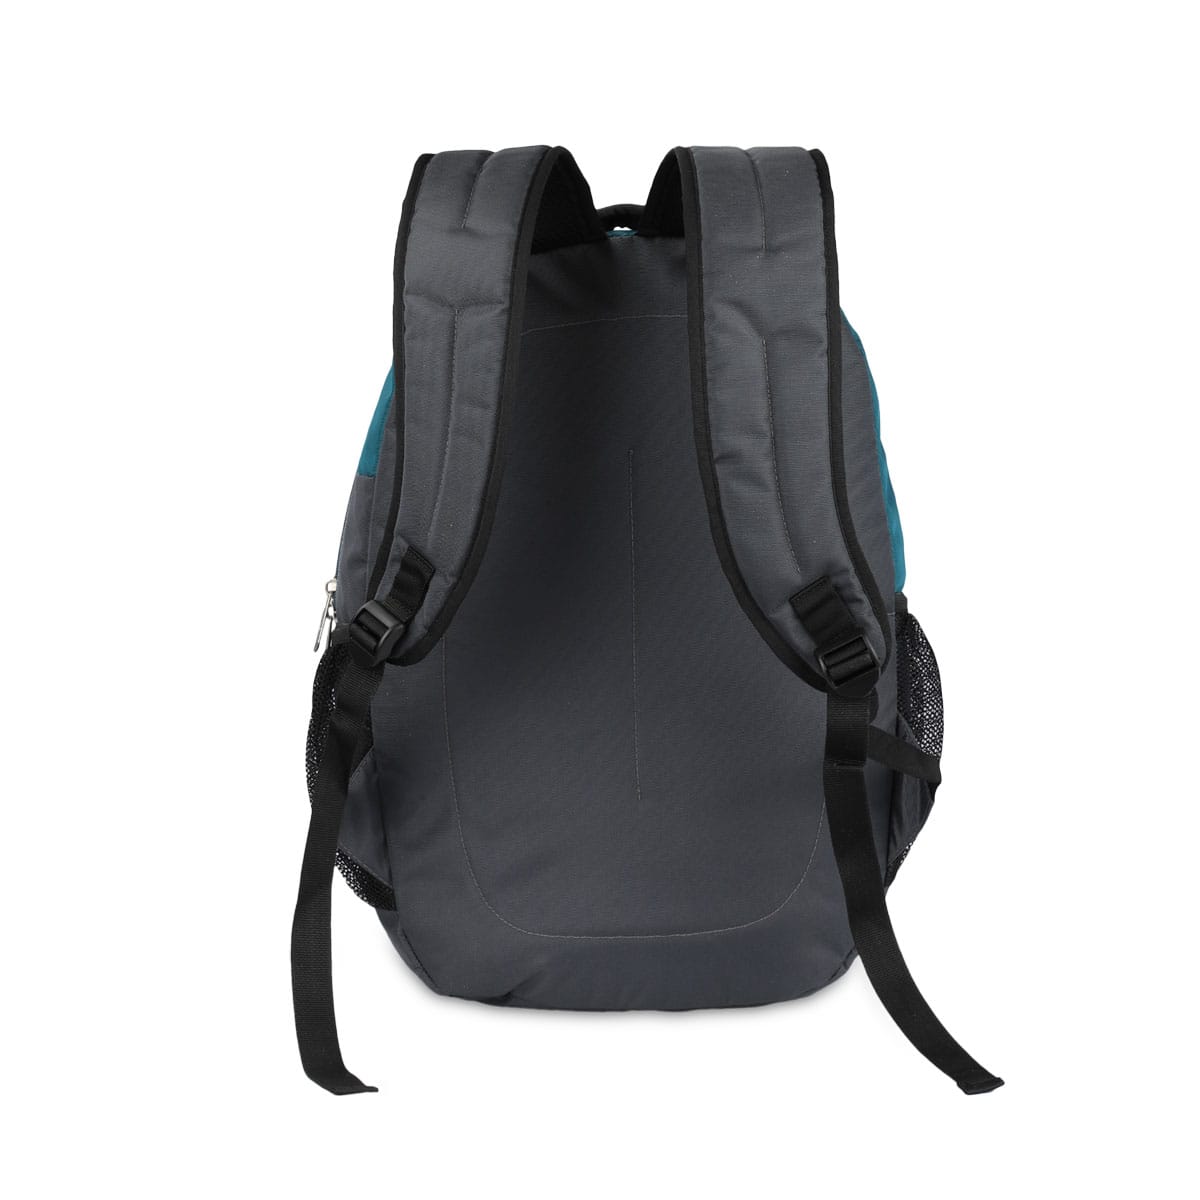 Grey-Astral| Protecta Twister Laptop Backpack-3